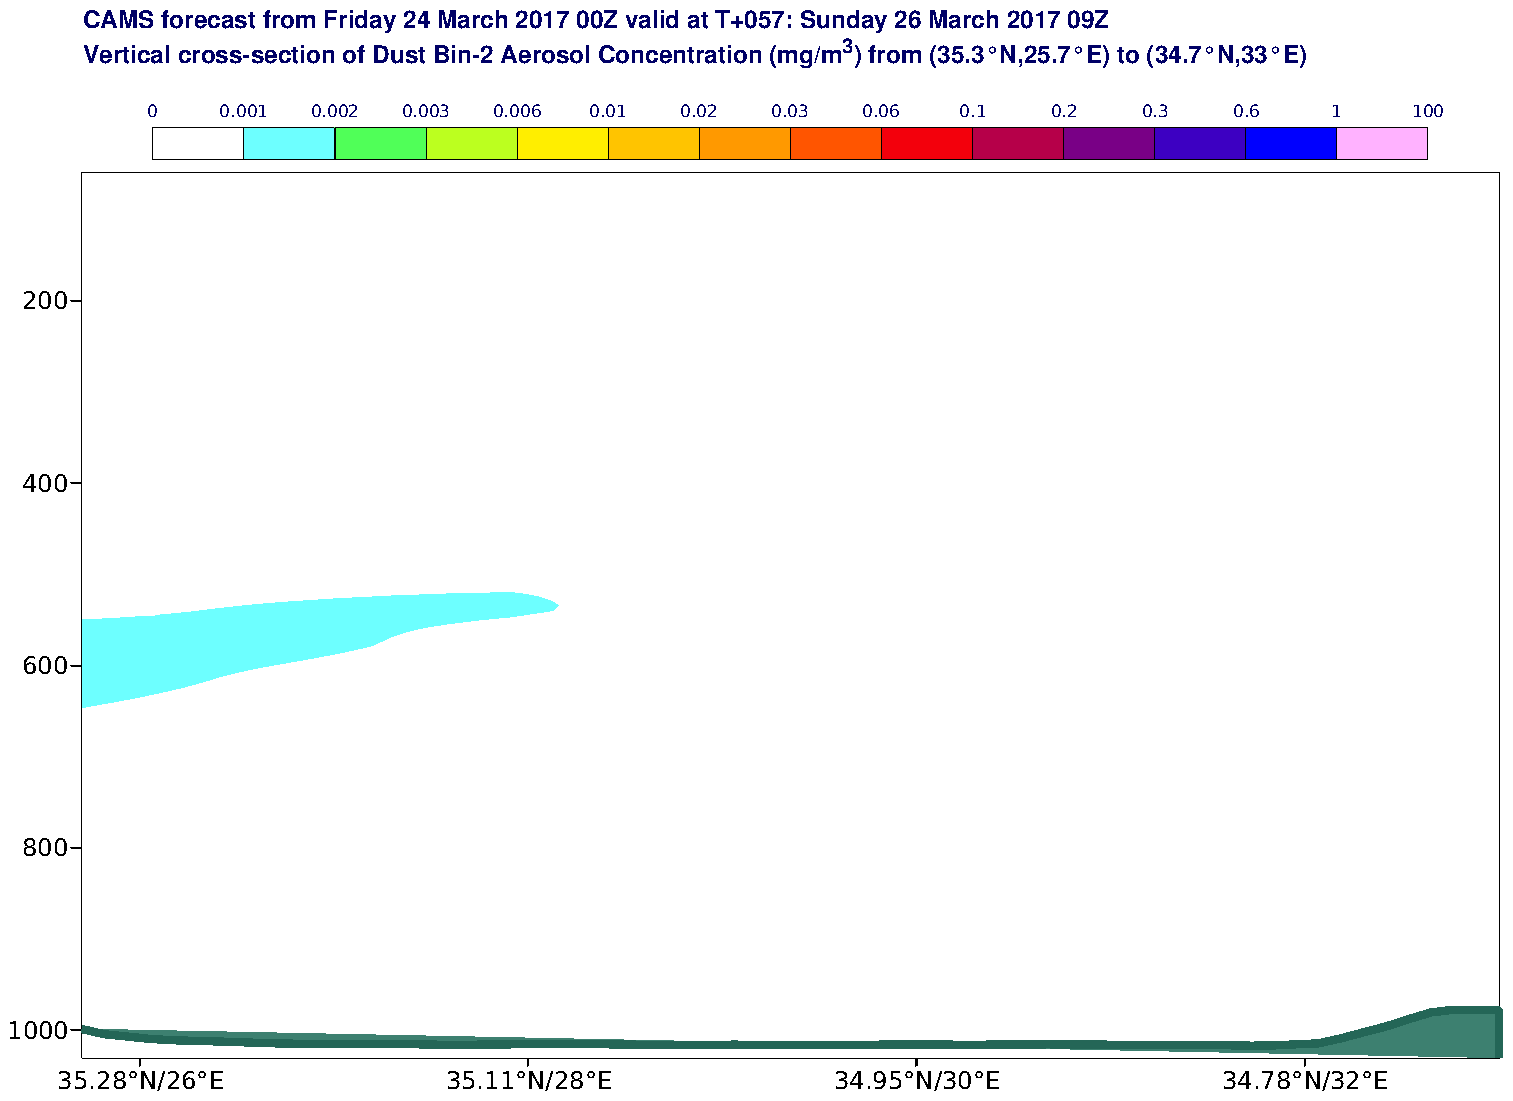 Vertical cross-section of Dust Bin-2 Aerosol Concentration (mg/m3) valid at T57 - 2017-03-26 09:00